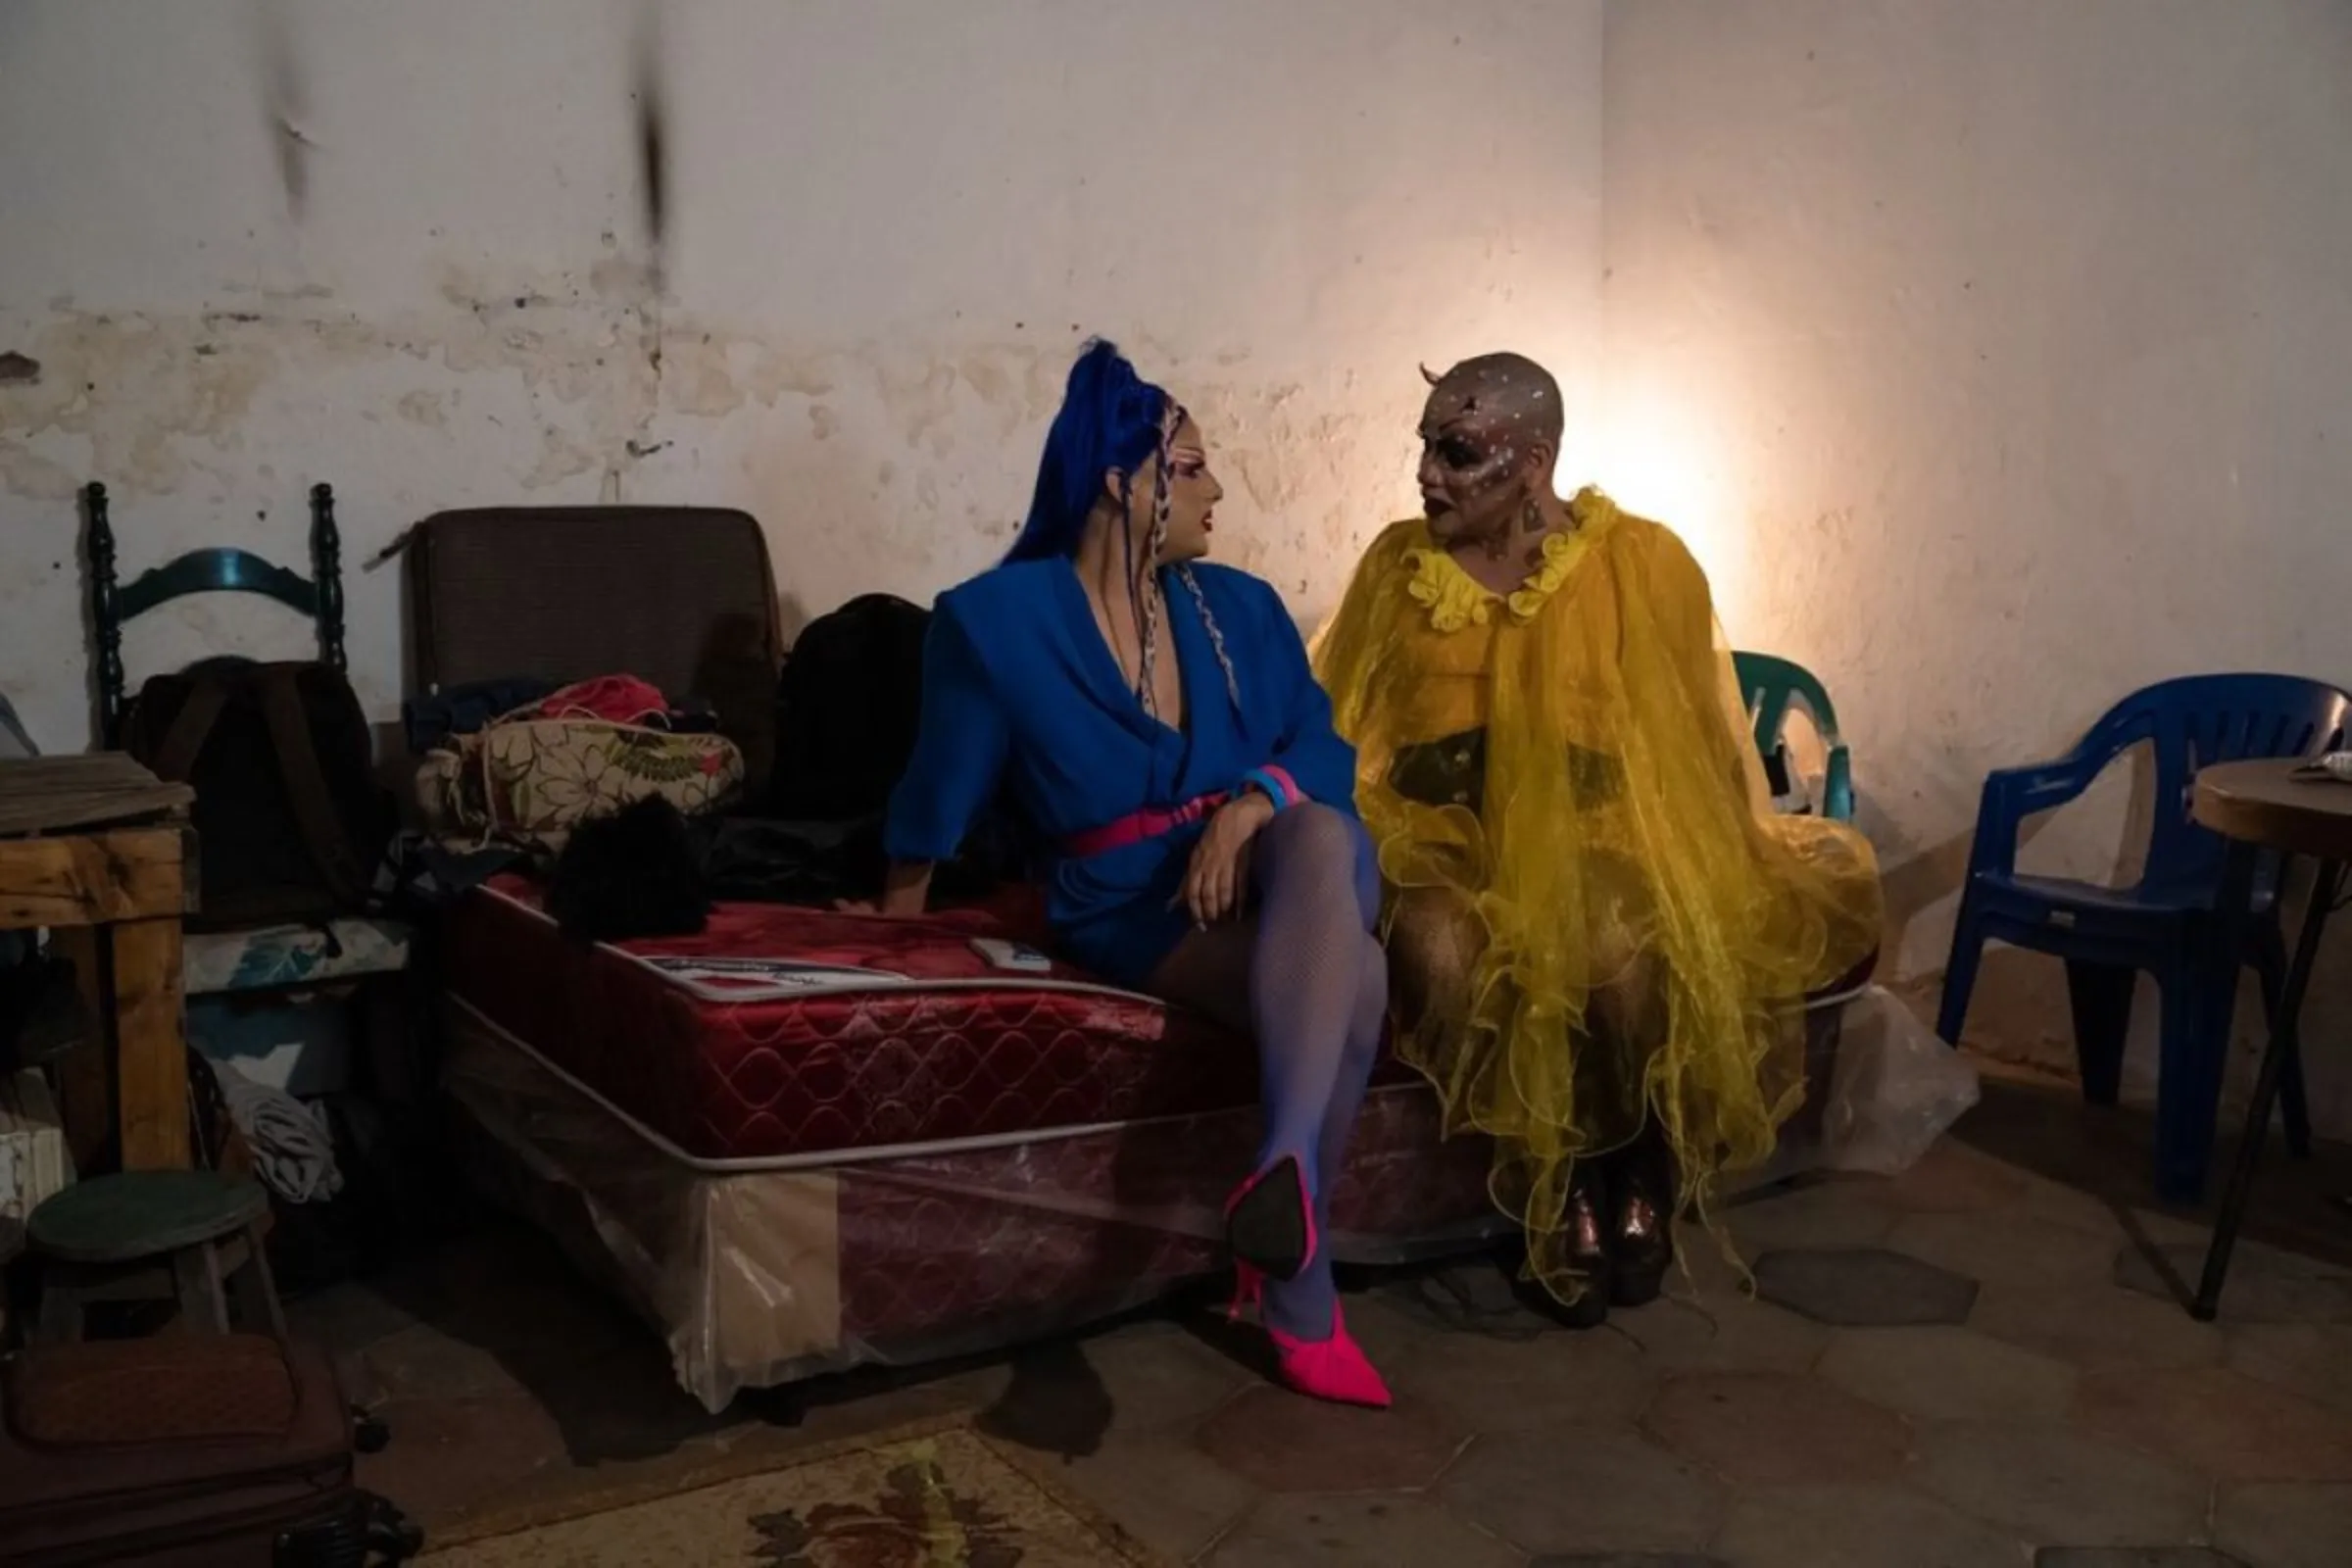 Dislexia Severa (left) and Envidia Metenes (right), two different generations of Paraguayan drag queens, talk together backstage at Envidia’s birthday celebration at Literaity, a cultural centre in Asunción, Paraguay, February 22, 2023